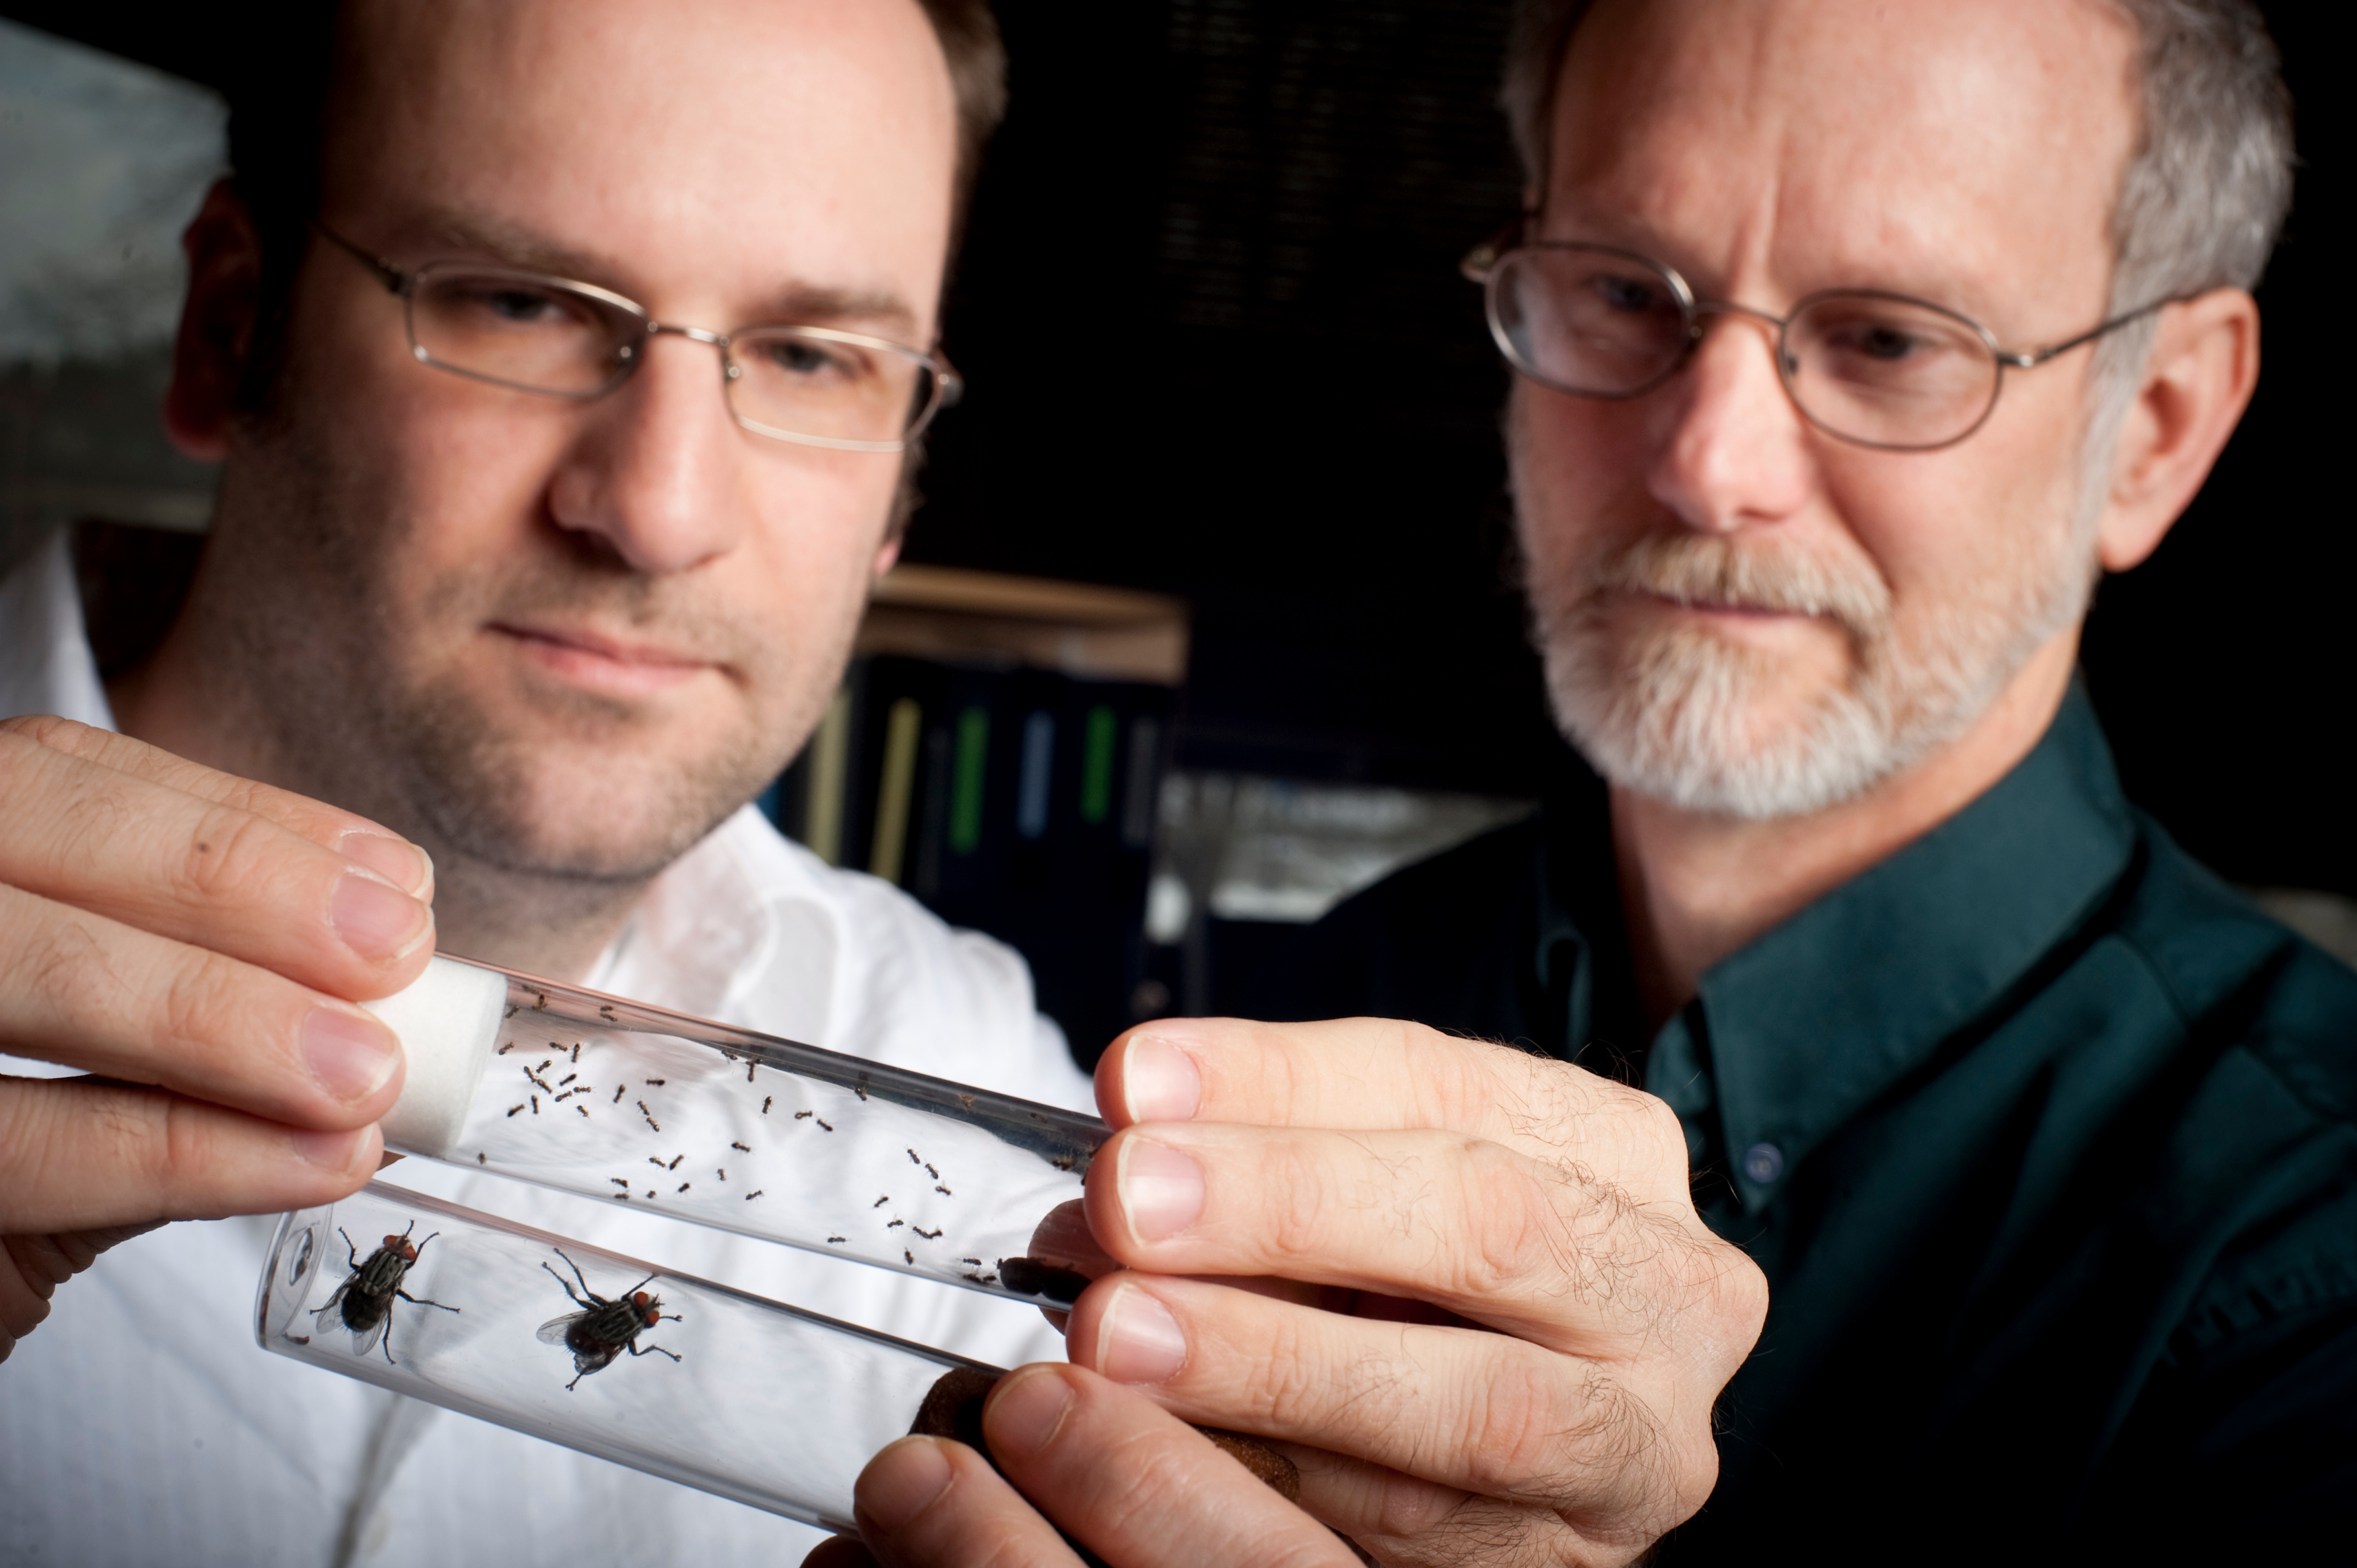 Chris Desjardin and <b>Jack Werren</b> compare parasitic wasps (tiny insects in ... - hi535